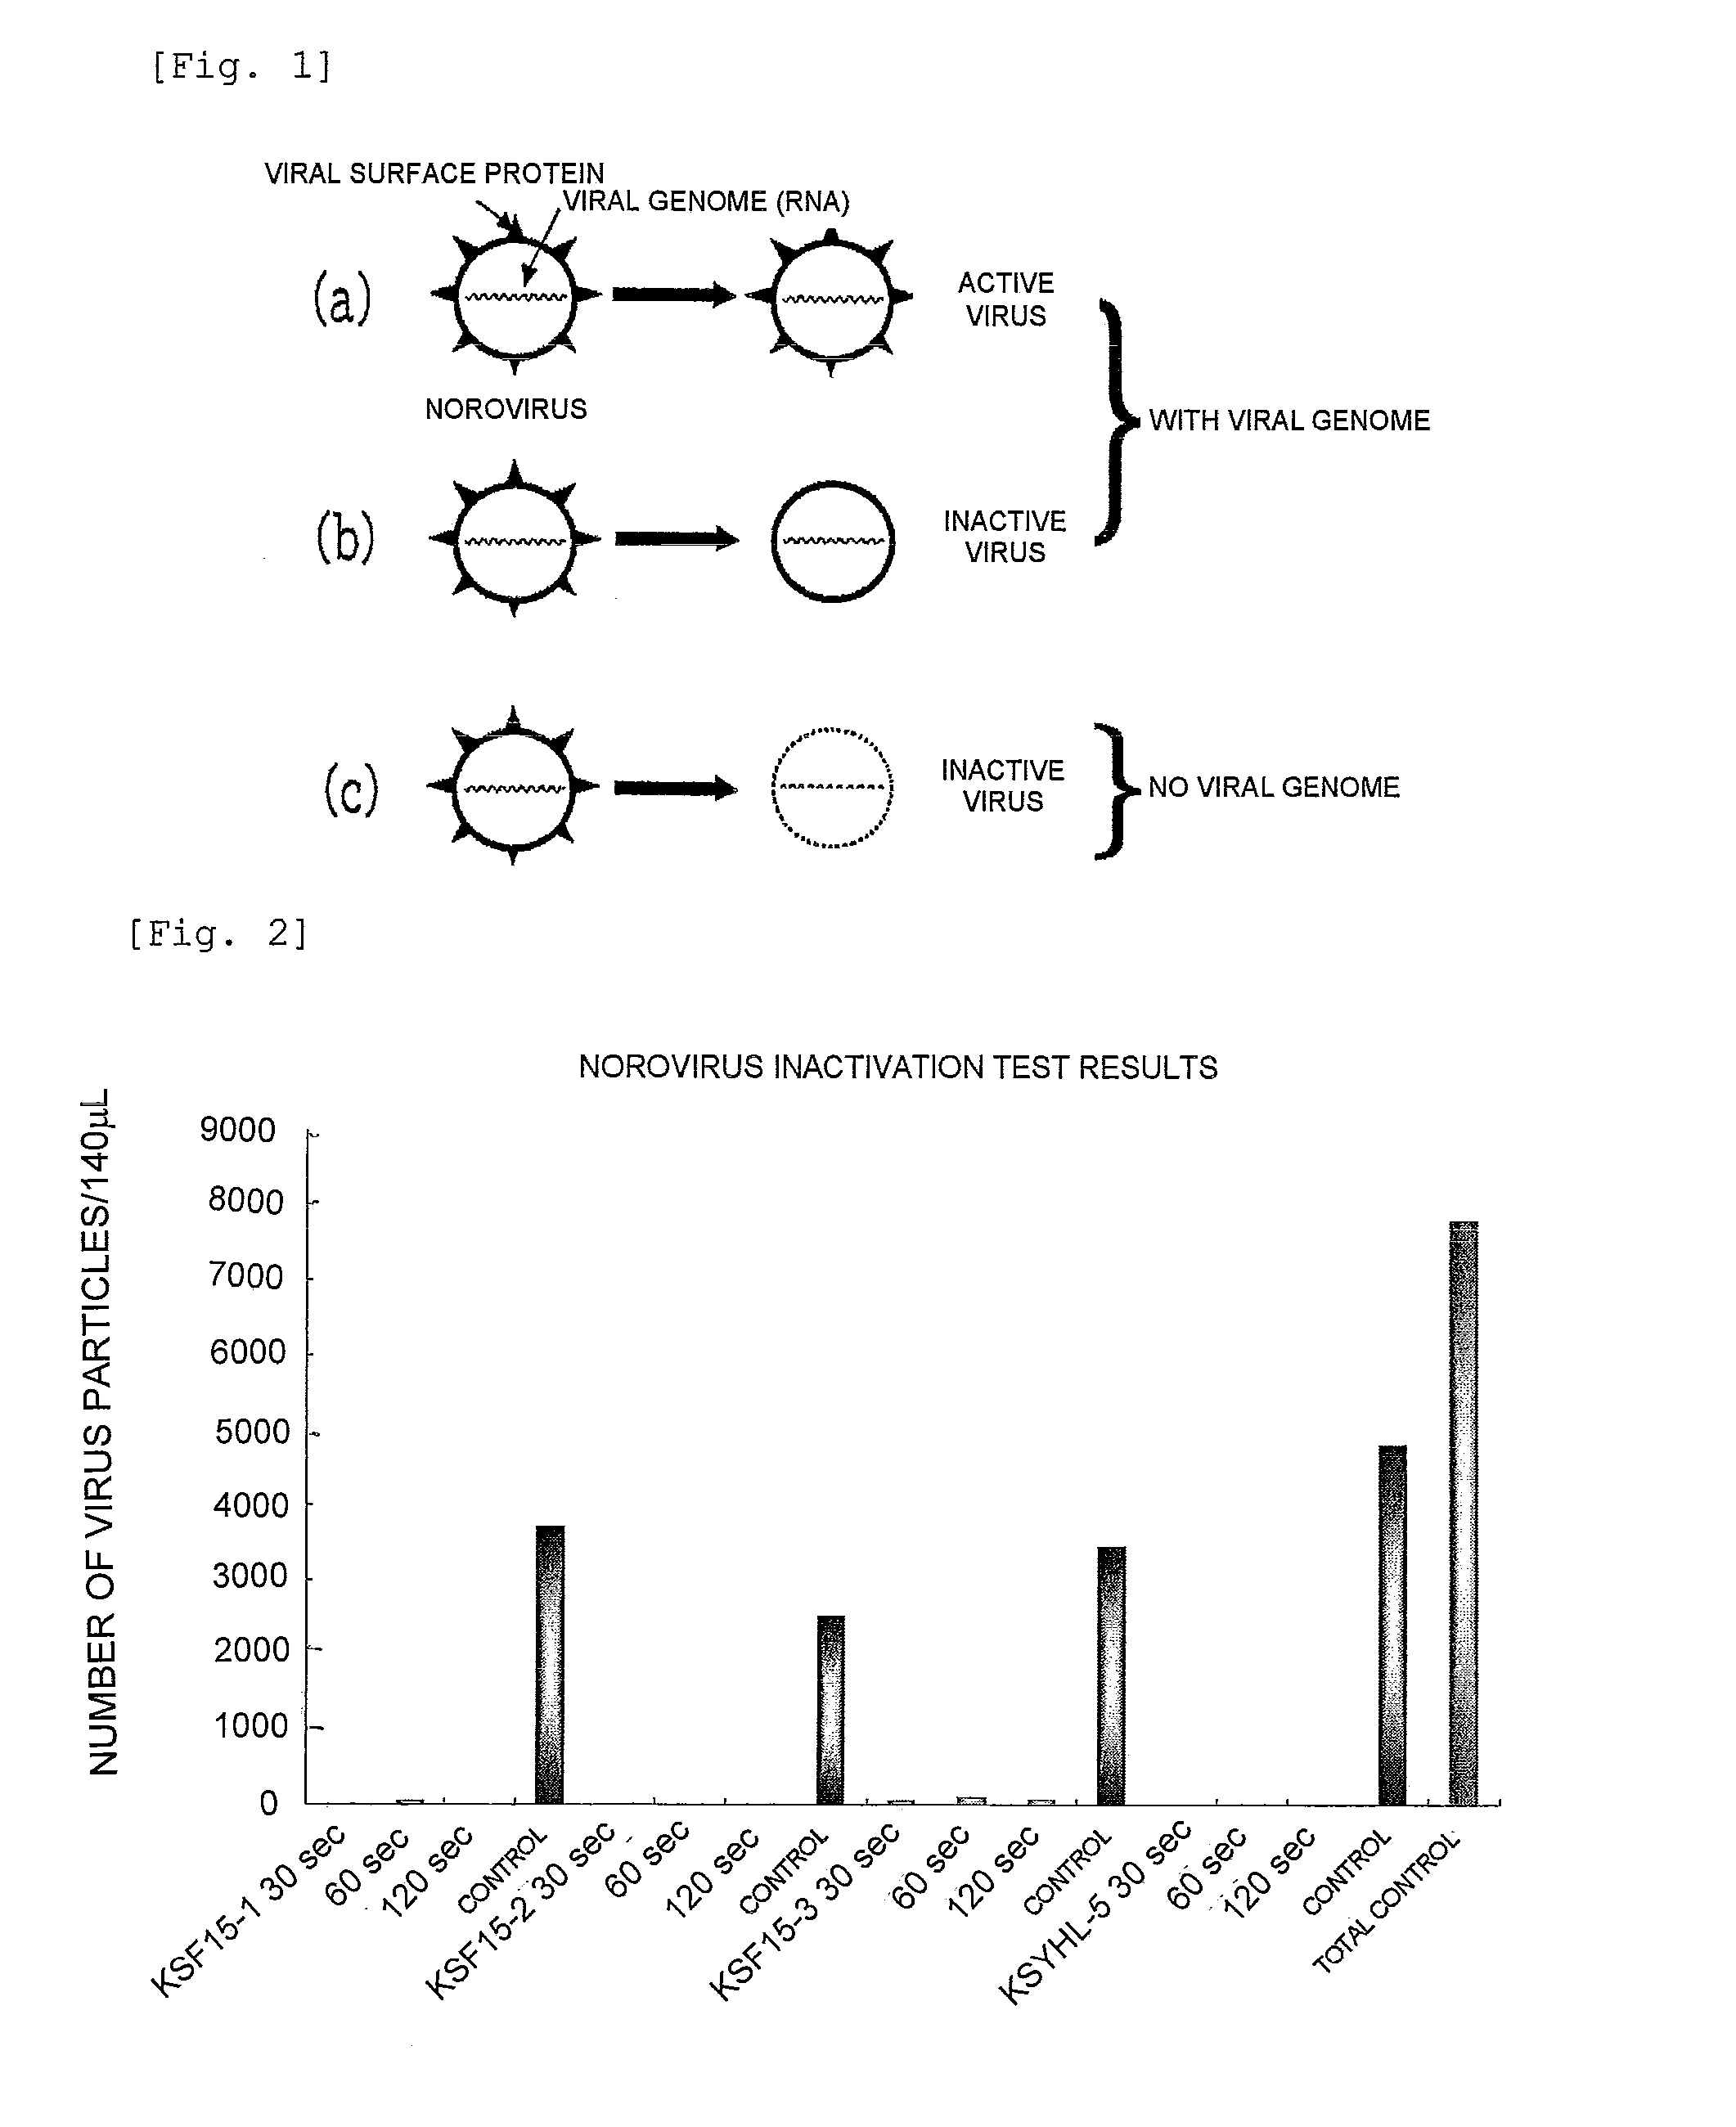 Method of Disinfection or Infection Control Against Norovirus